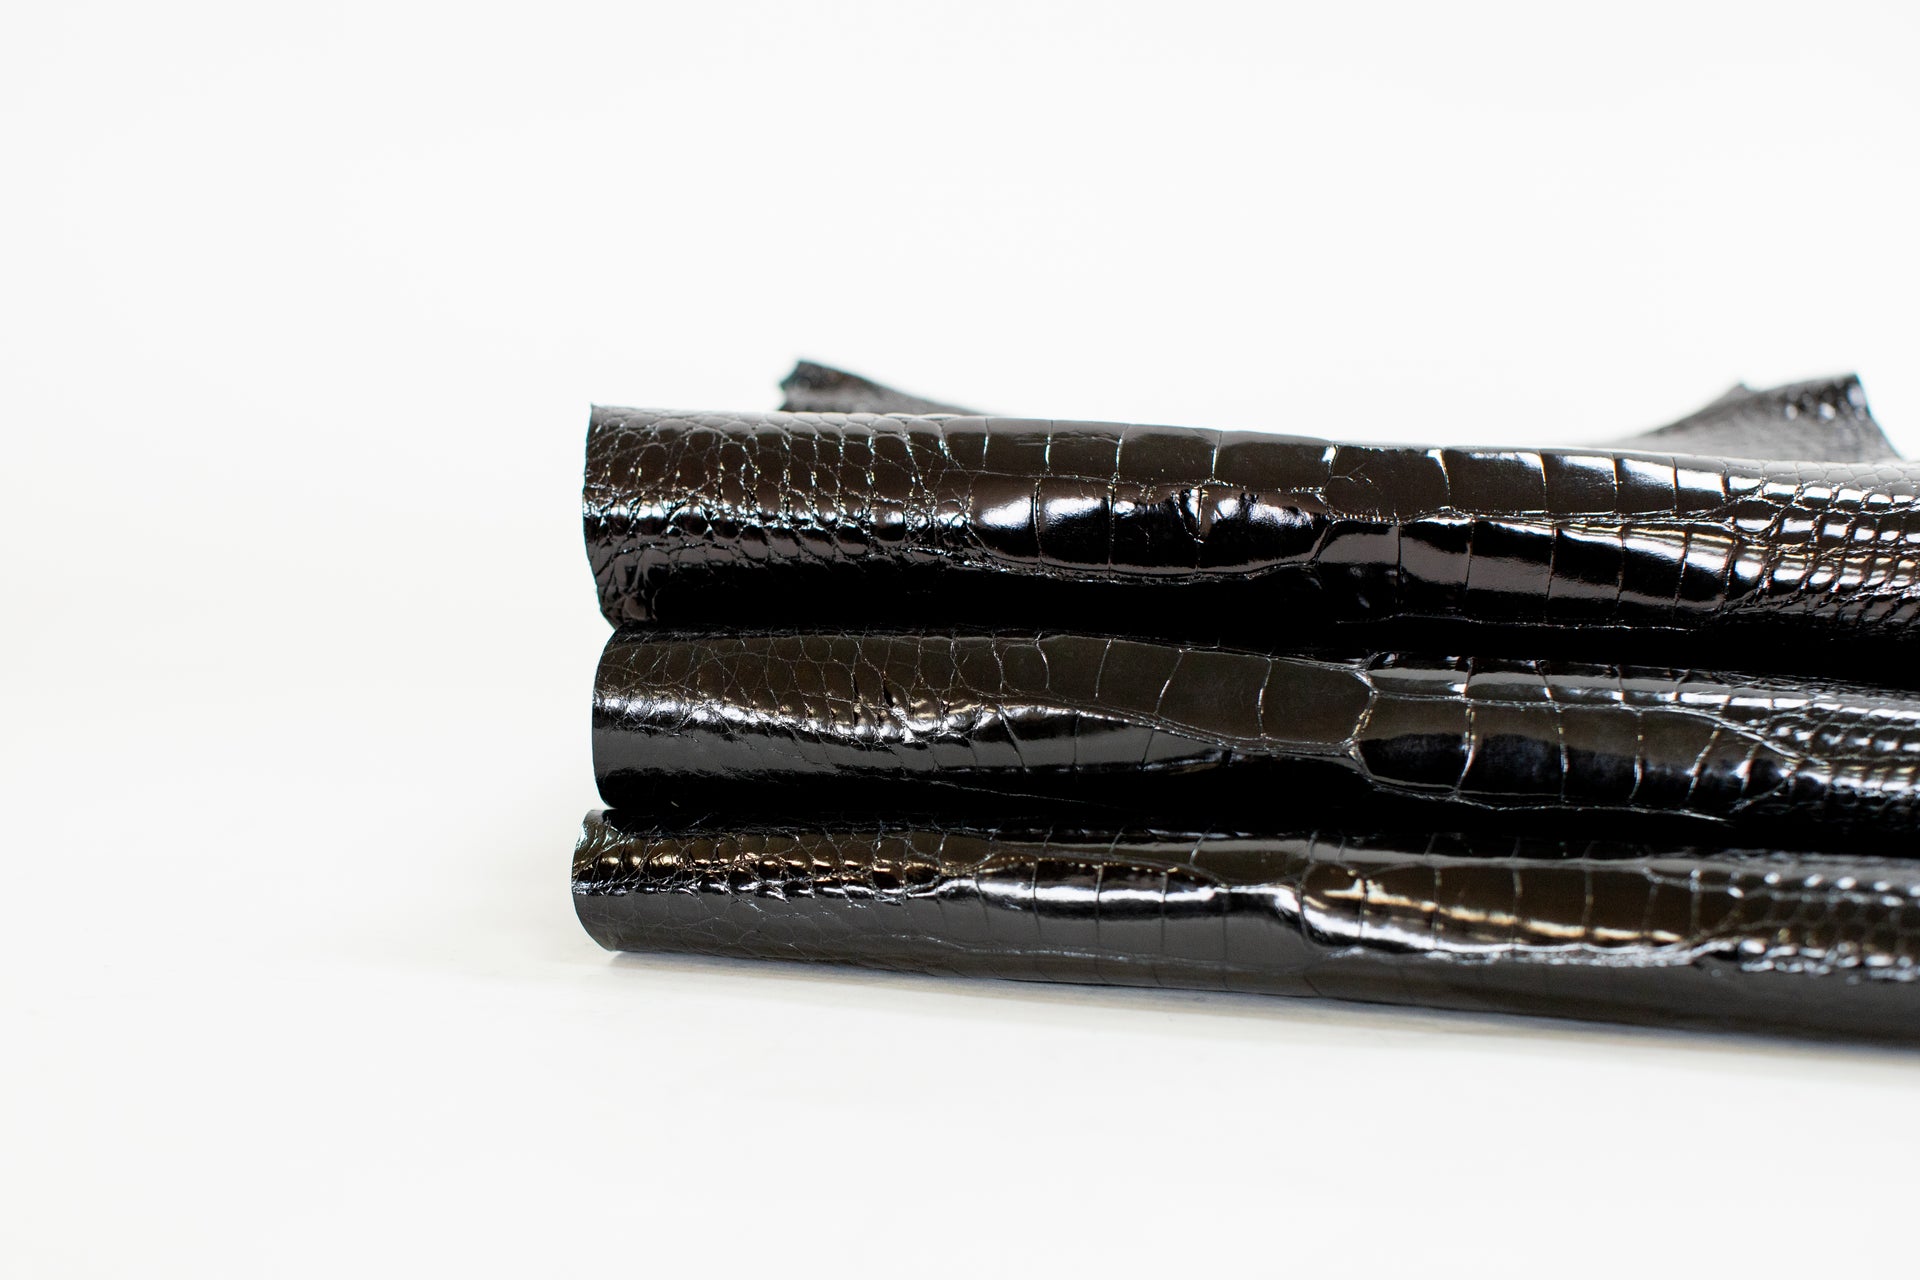 WITH HOLES | 30-34 cm Grade 2/3 Black Glazed Wild American Alligator Belly Leather